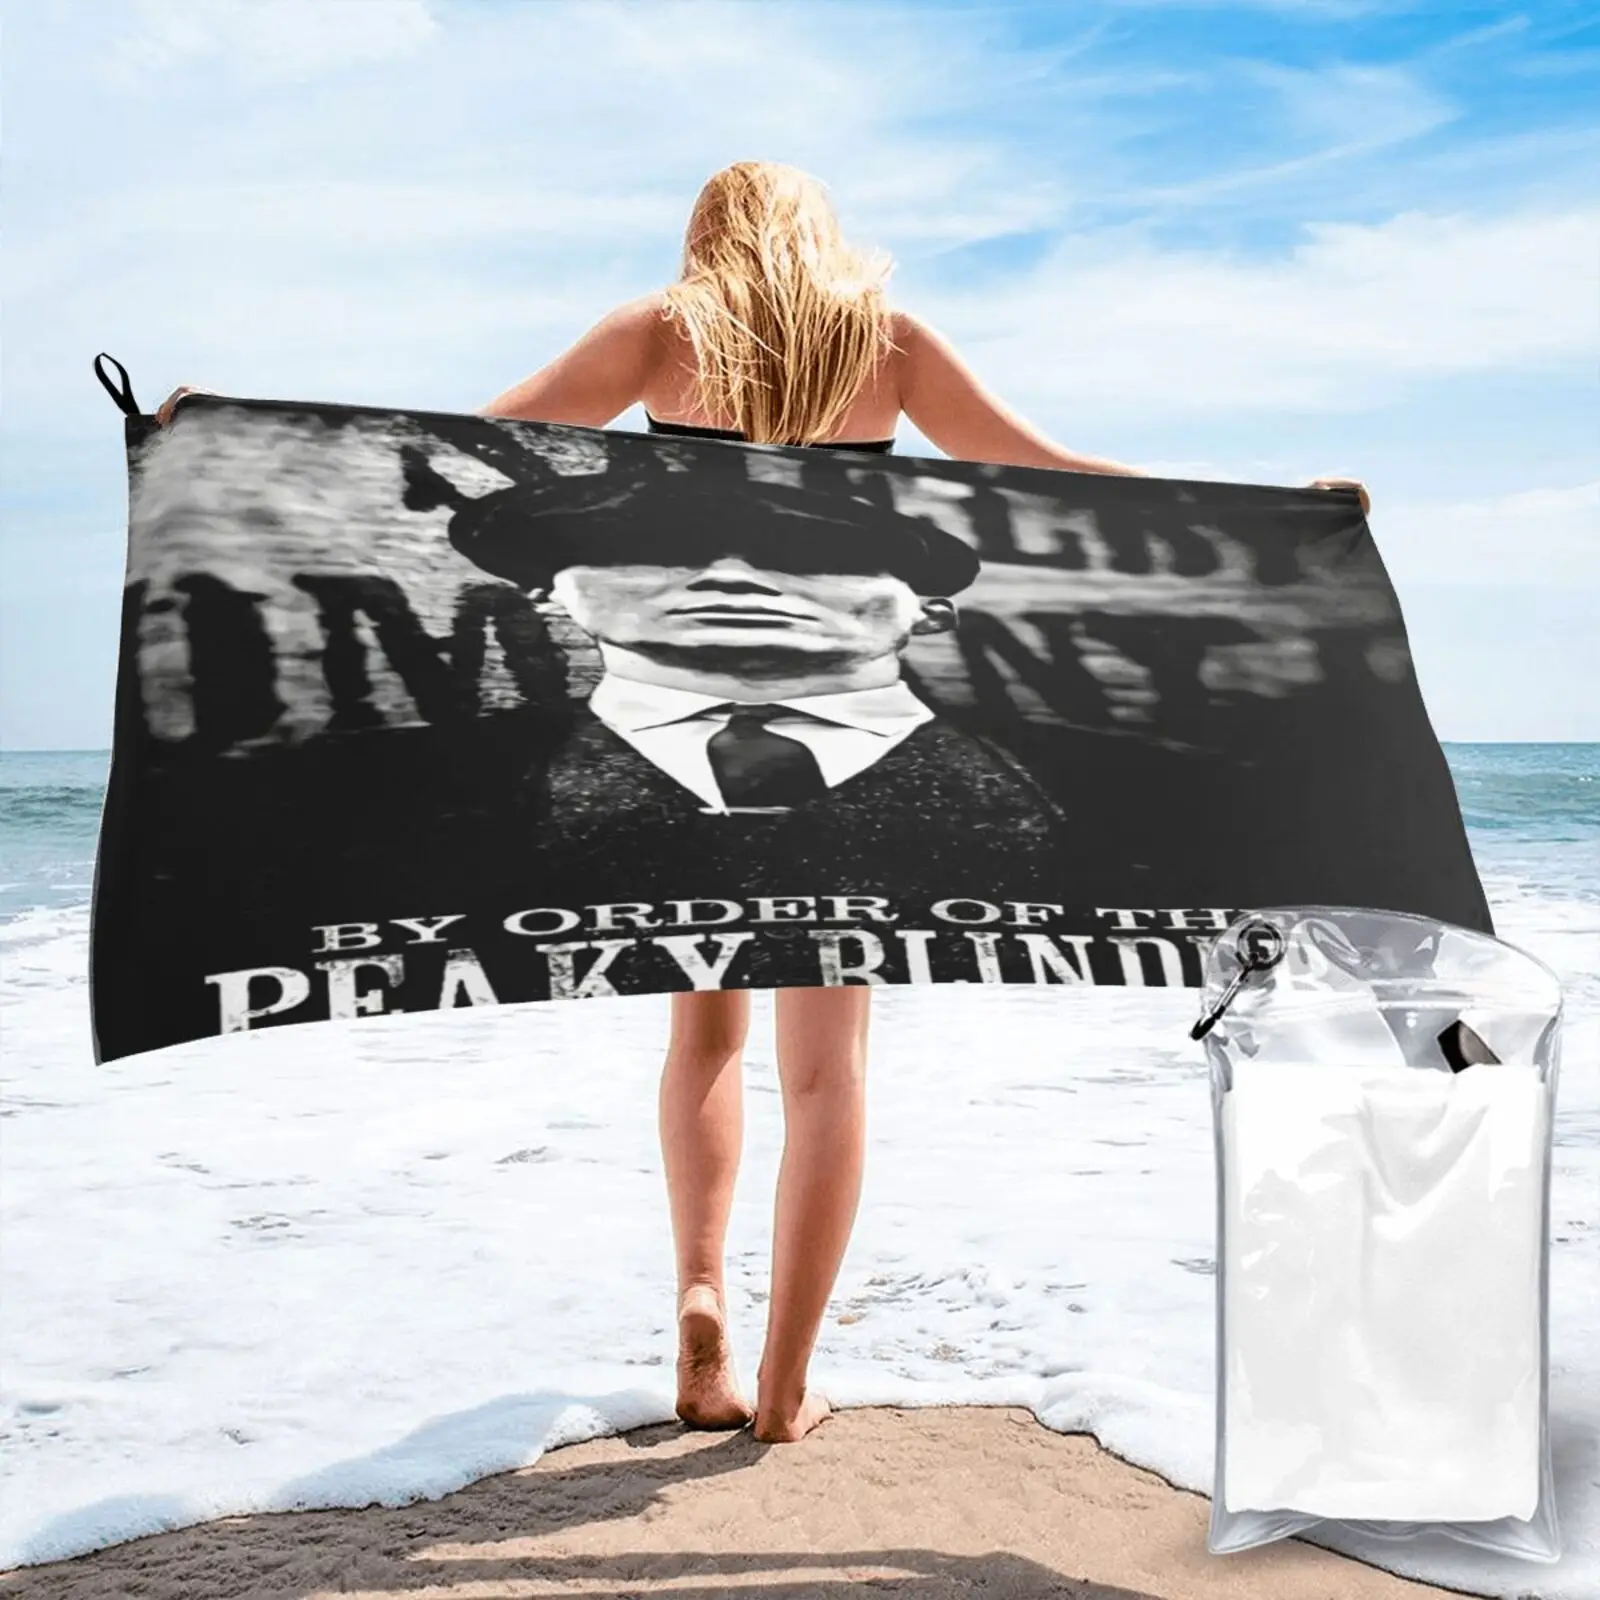 

Peaky Blinders Tv Show By Order Beach Towel Bath Towel For Bath Kitchen Towel Hand Towels For The Beach Spa For Bath And Sauna